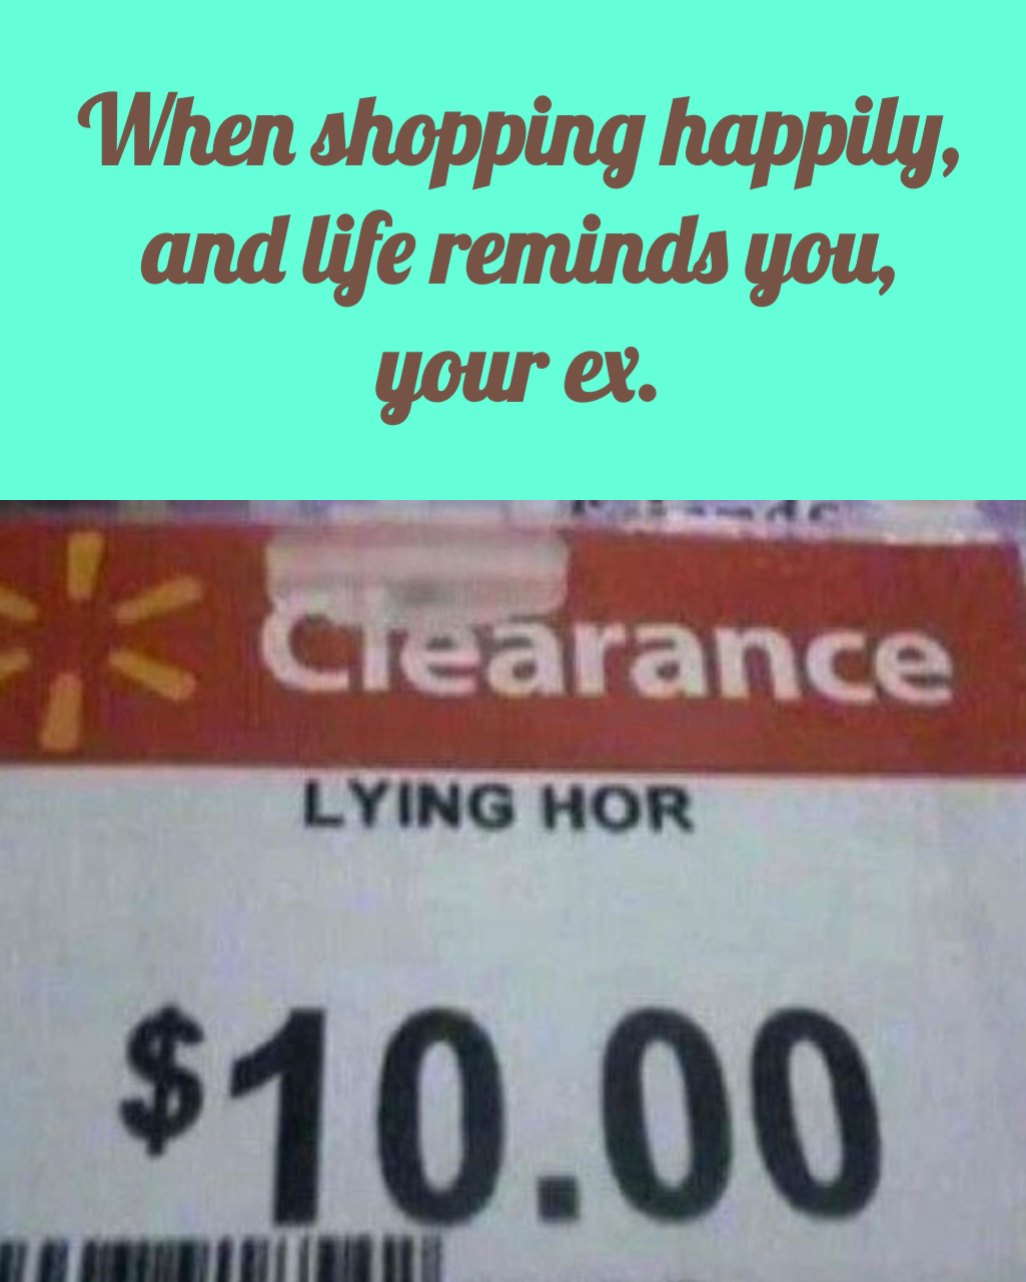 Type Text When shopping happily, and life reminds you,
your ex.